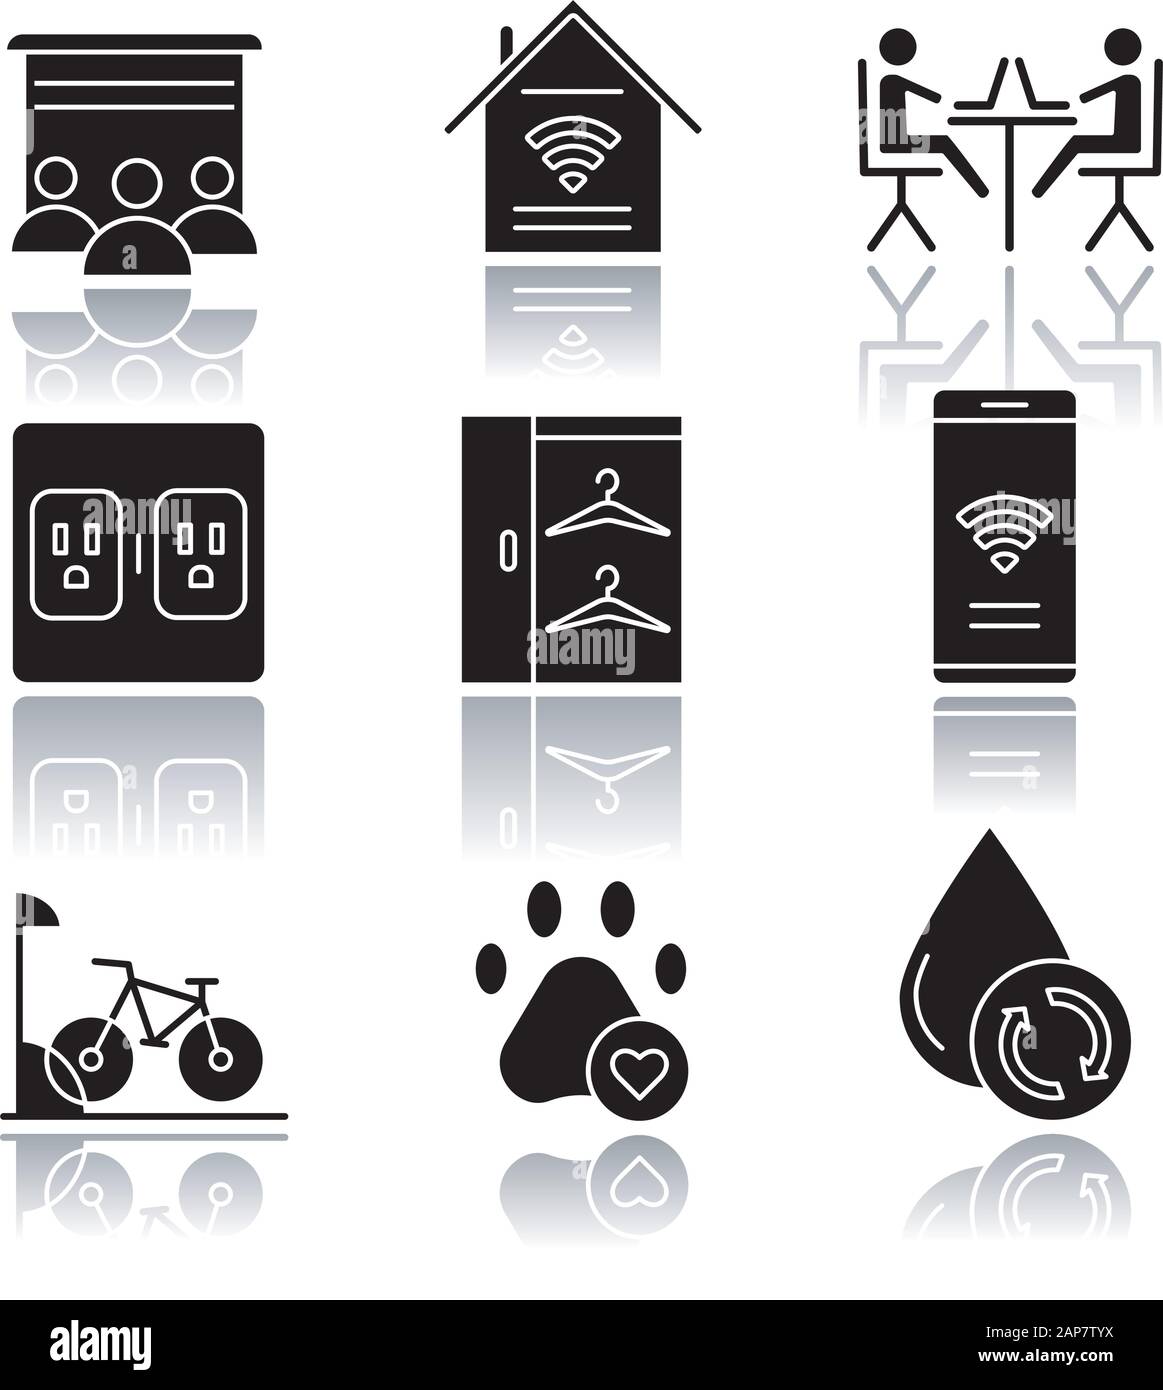 Apartment amenities drop shadow black glyph icons set. Movie theater, smart home, charging outlets, walk in closets, internet access, pets allowed, wa Stock Vector